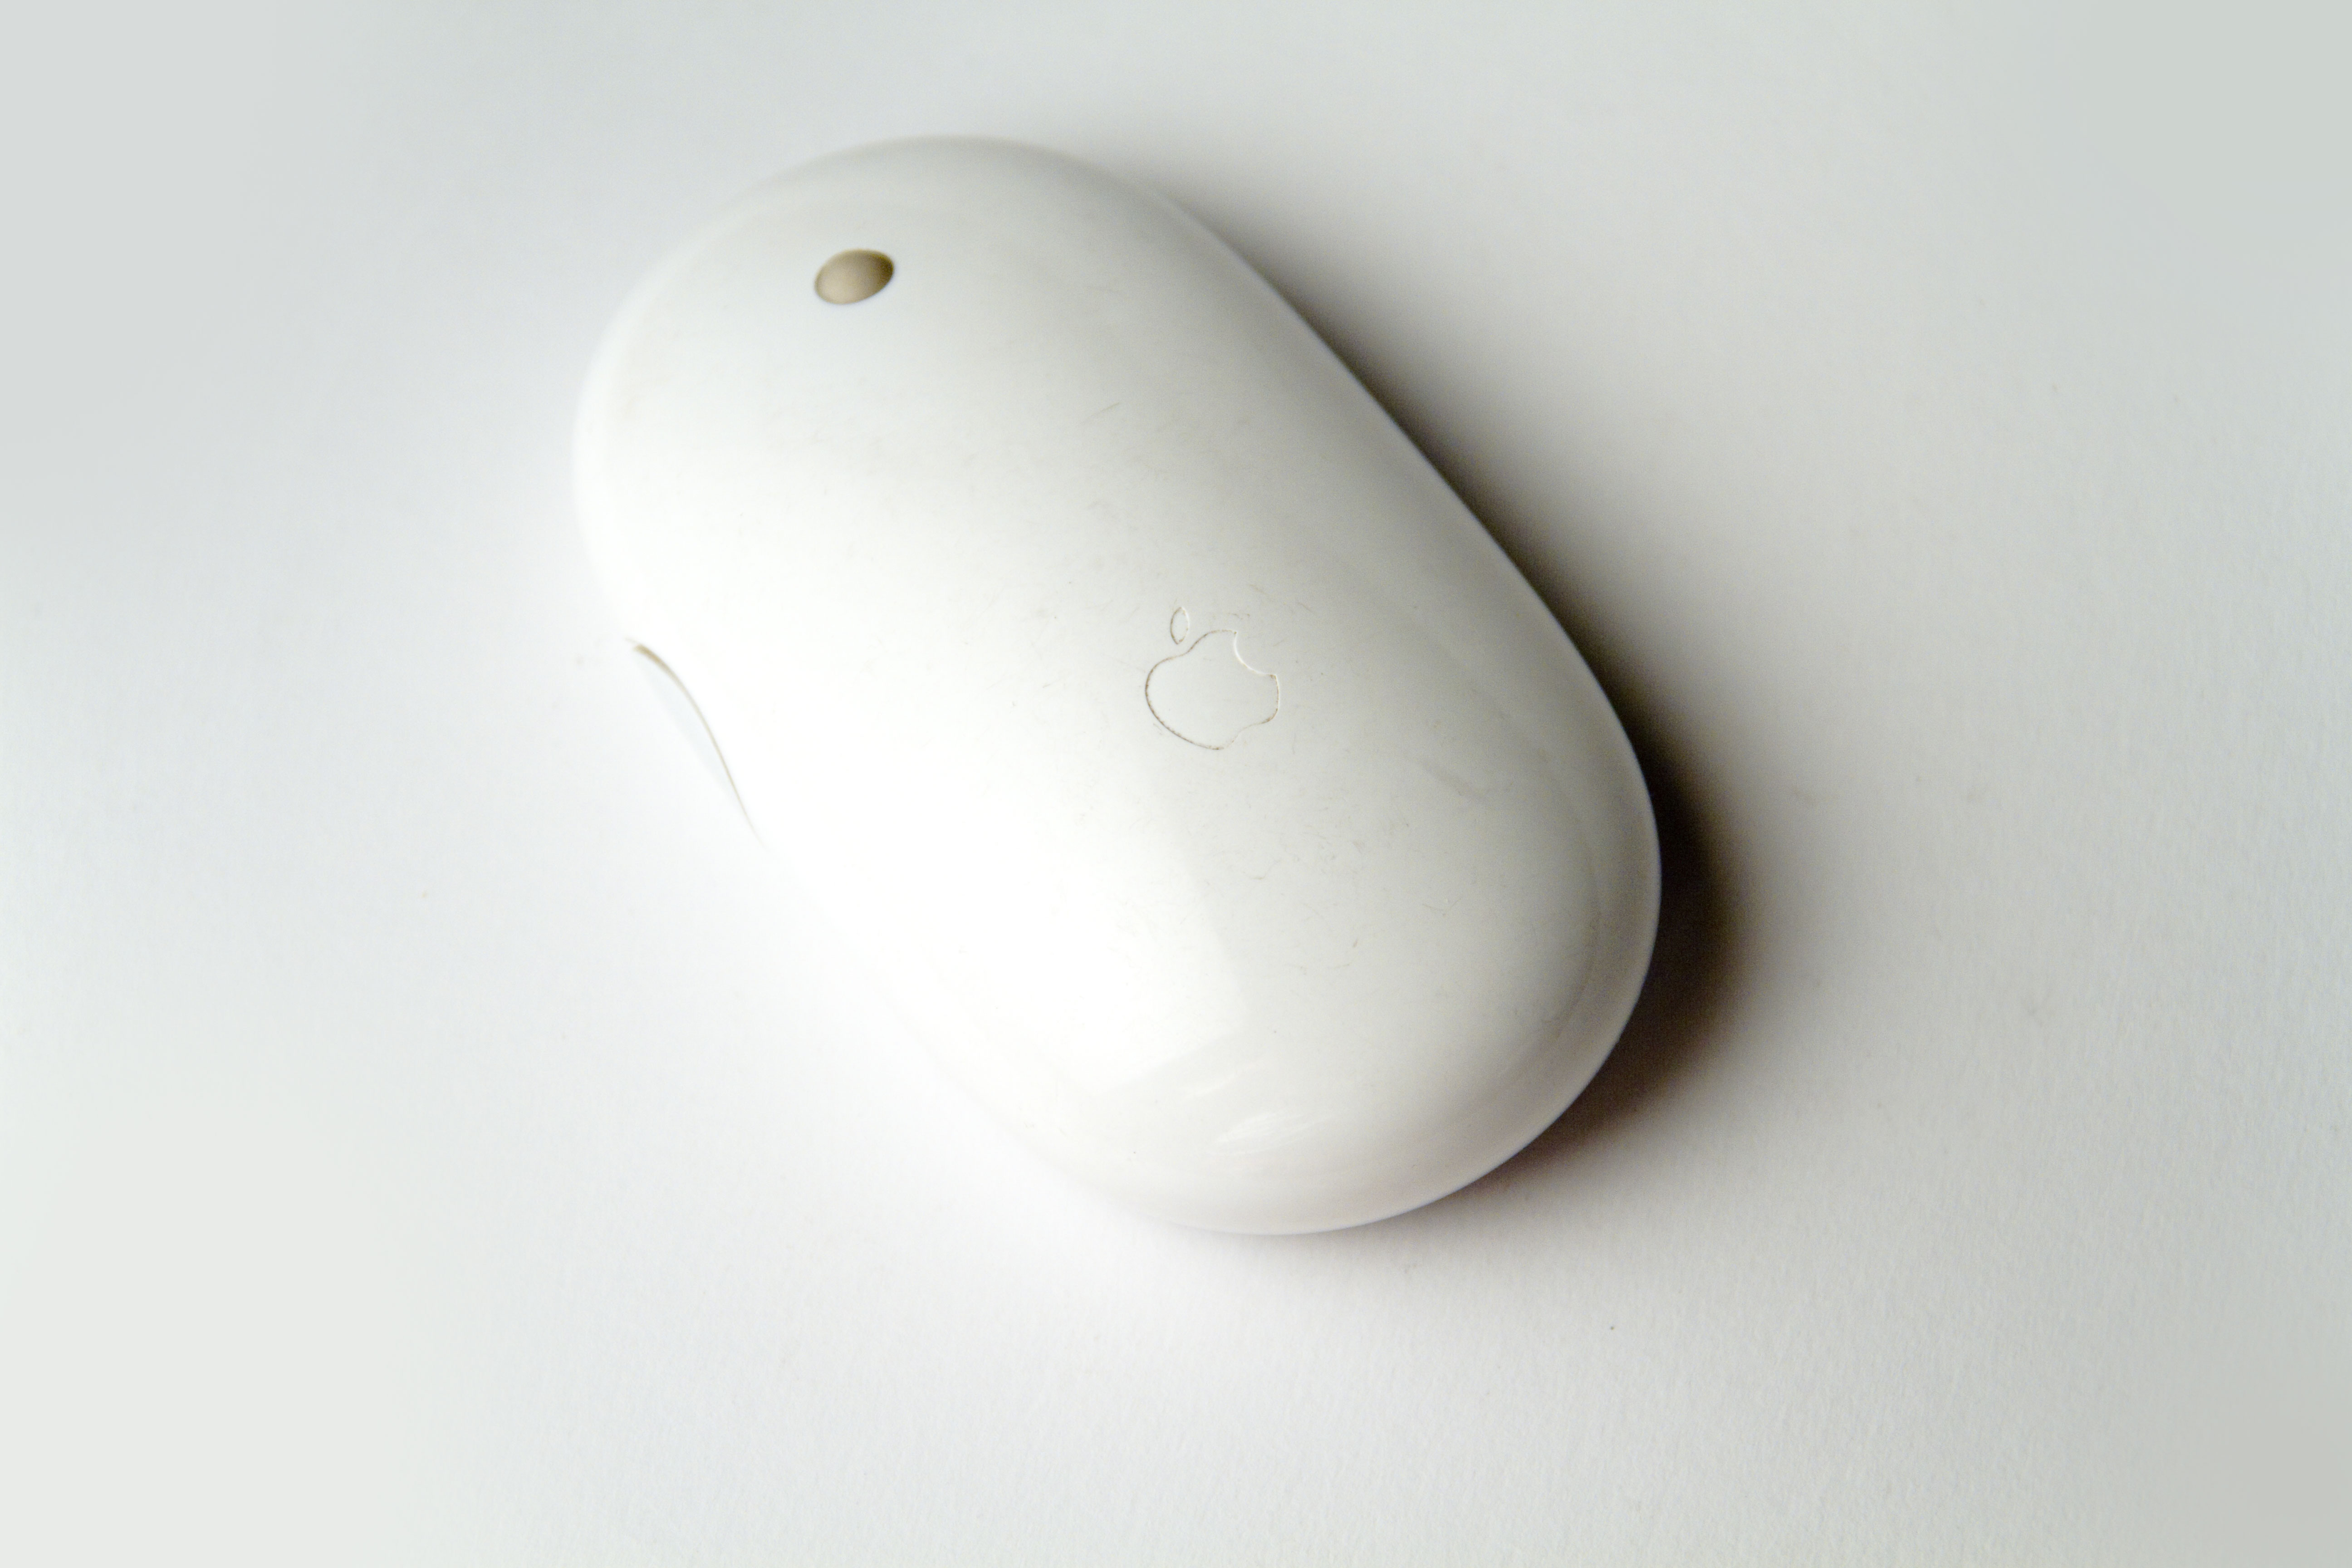 Apple Mighty Mouse - Wikipedia